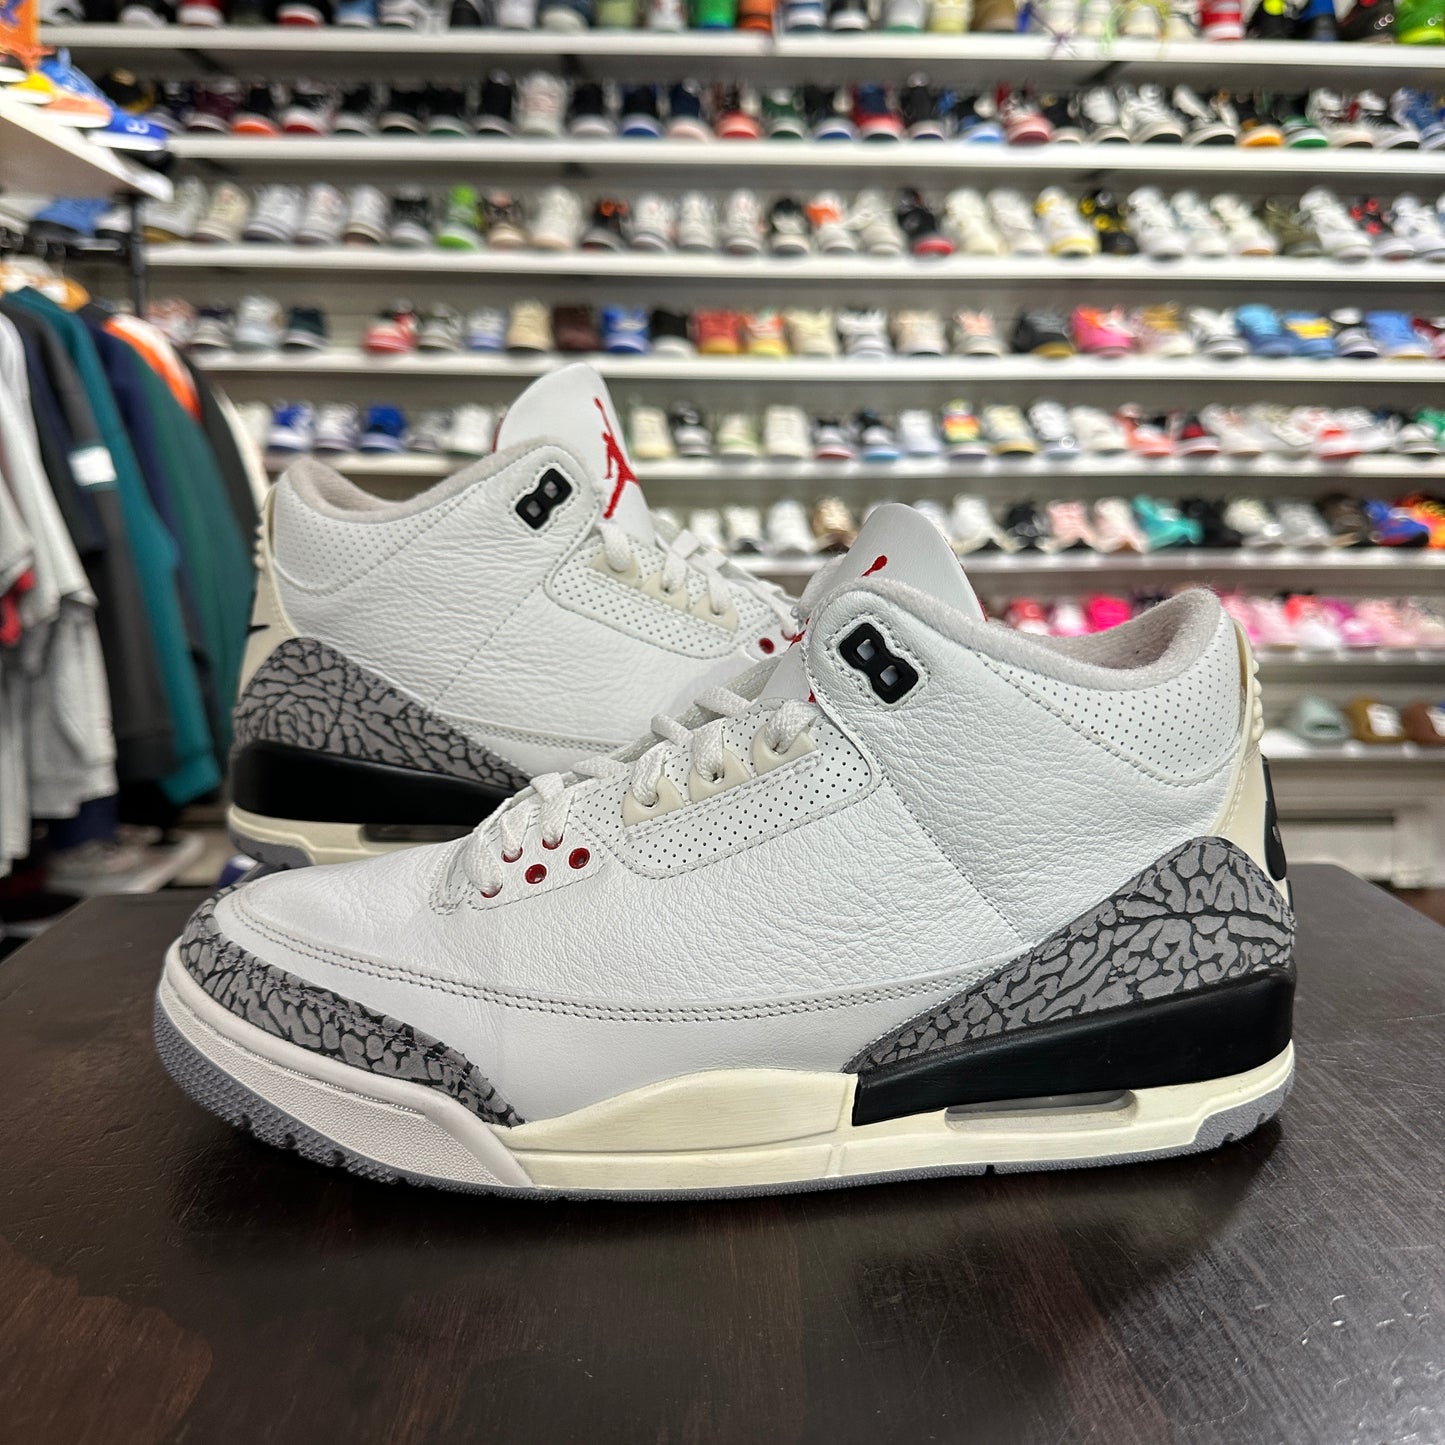 *USED* Air Jordan 3 Reimagined White Cement (size 10)(NO BOX)